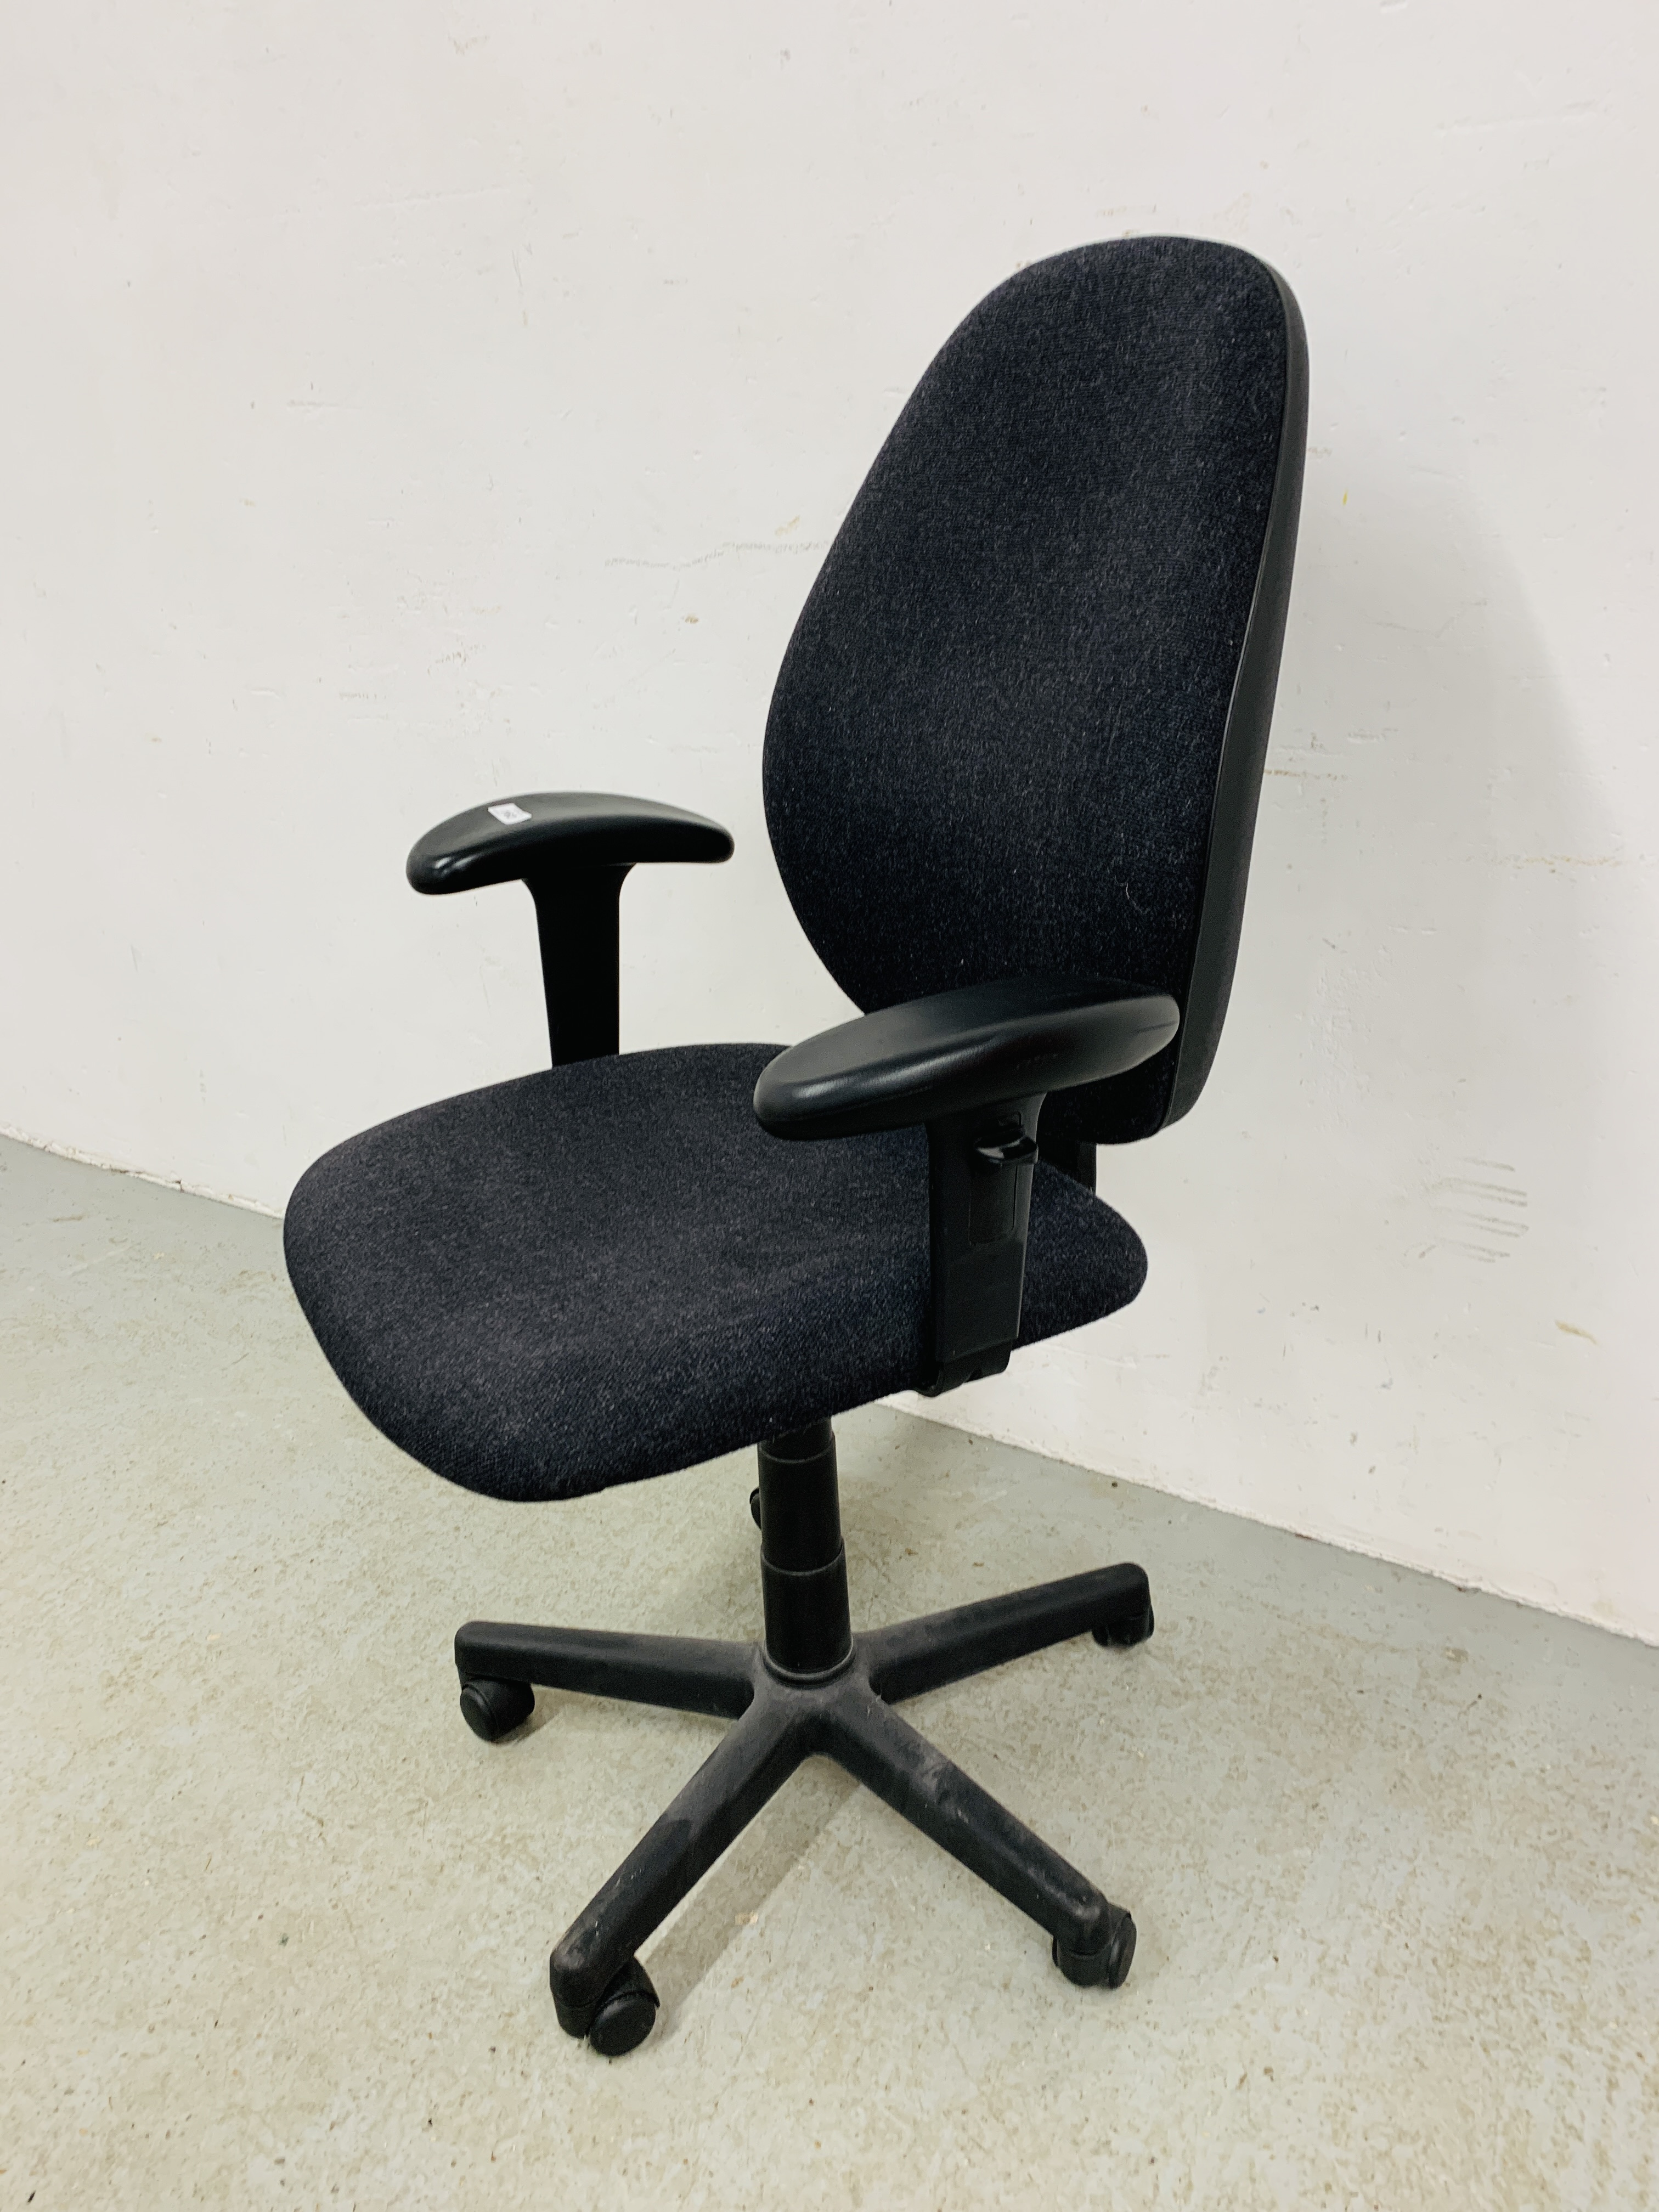 A GOOD QUALITY MODERN REVOLVING OFFICE CHAIR - Image 2 of 4